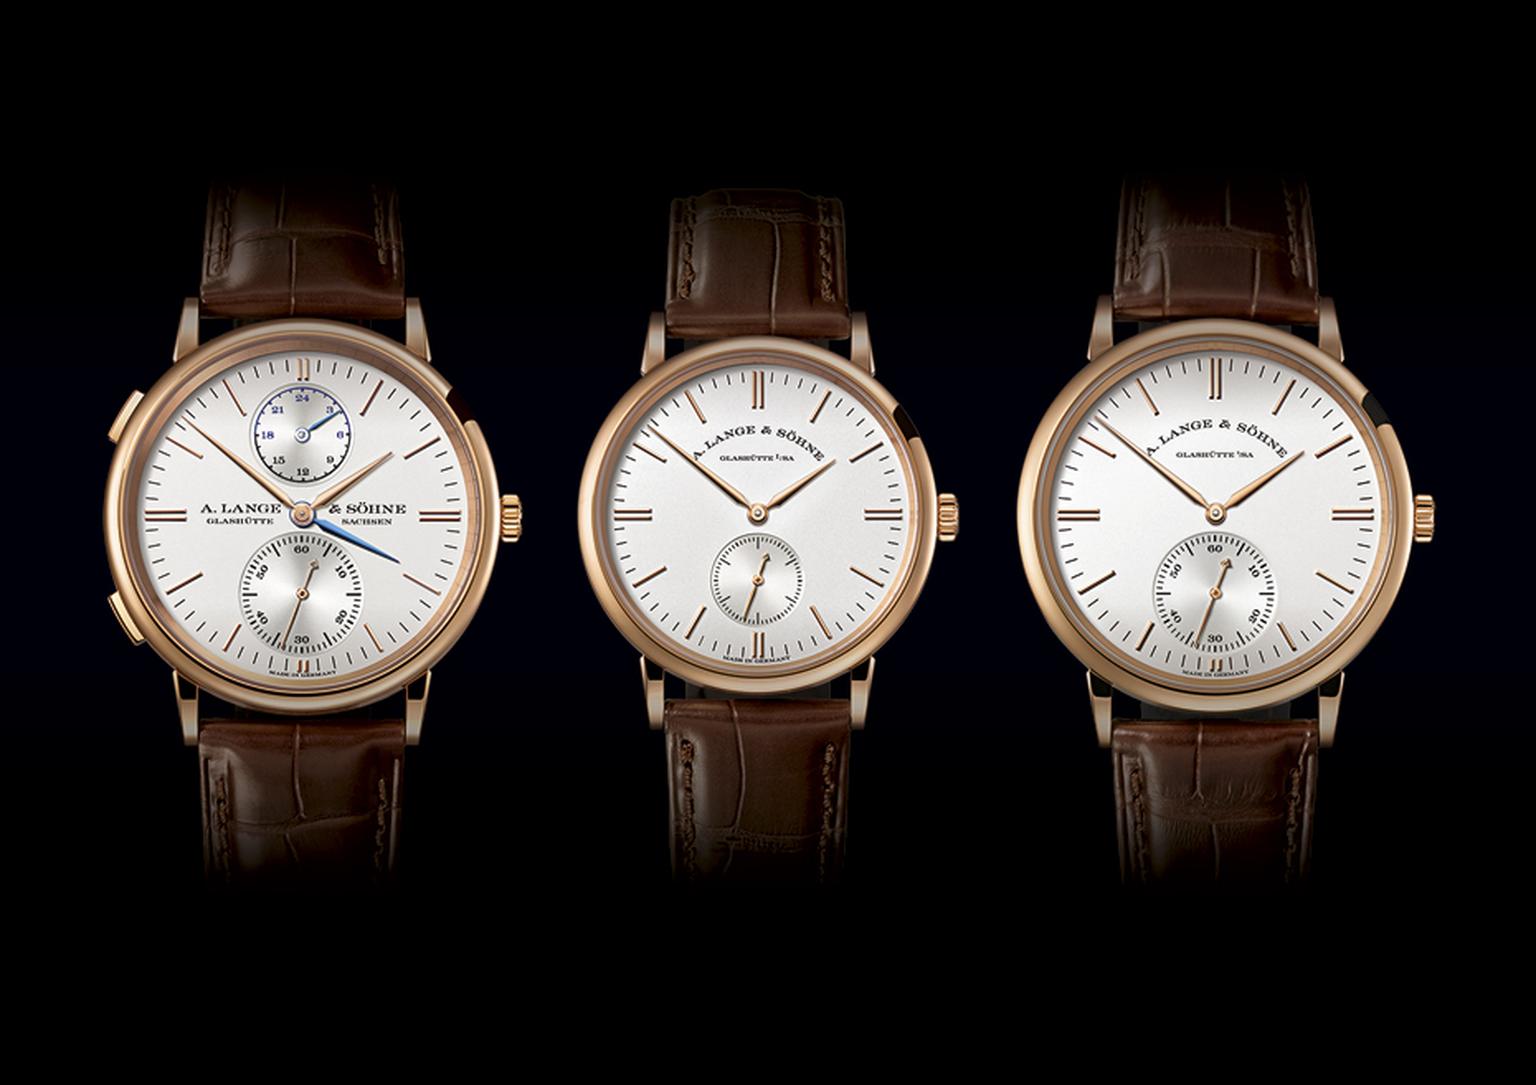 During the week of the SIHH watch salon in Geneva, A. Lange & Söhne has launched three models of its Saxonia watch family with "new design accents" on the dial. From left to right: the Saxonia Dual Time; Saxonia; and Saxonia Automatic.